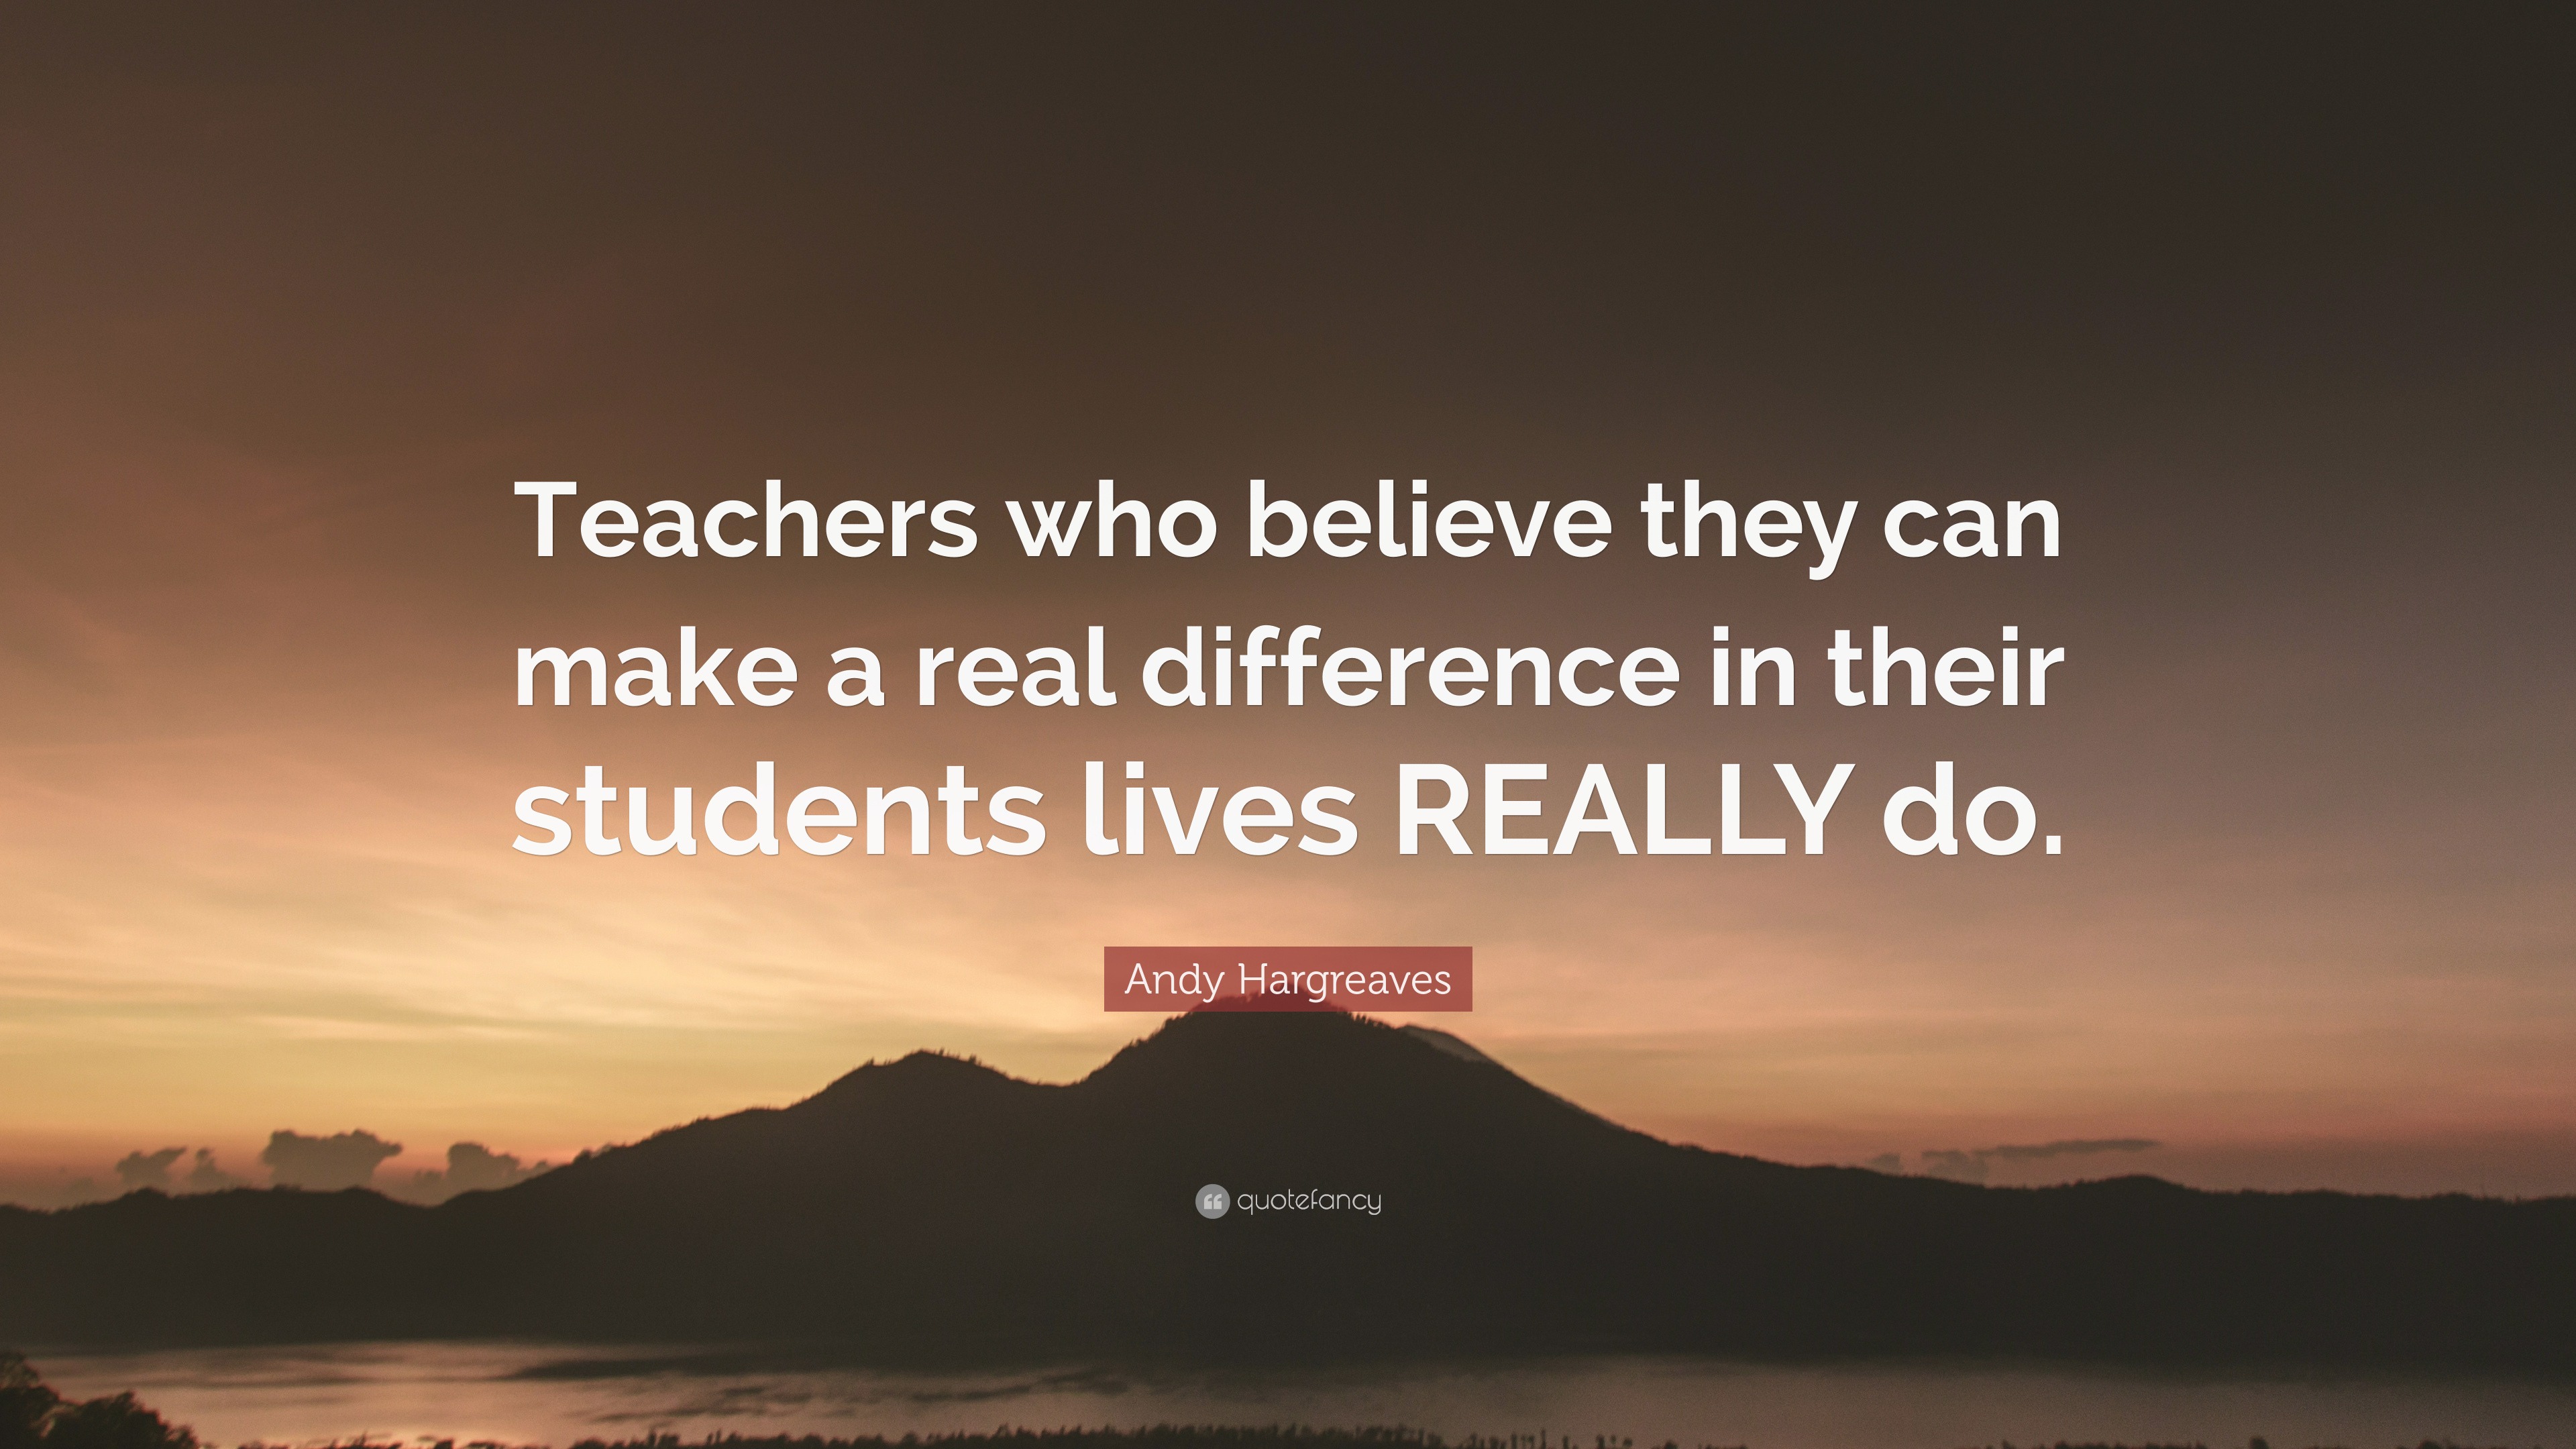 Andy Hargreaves Quote: “Teachers who believe they can make a real ...